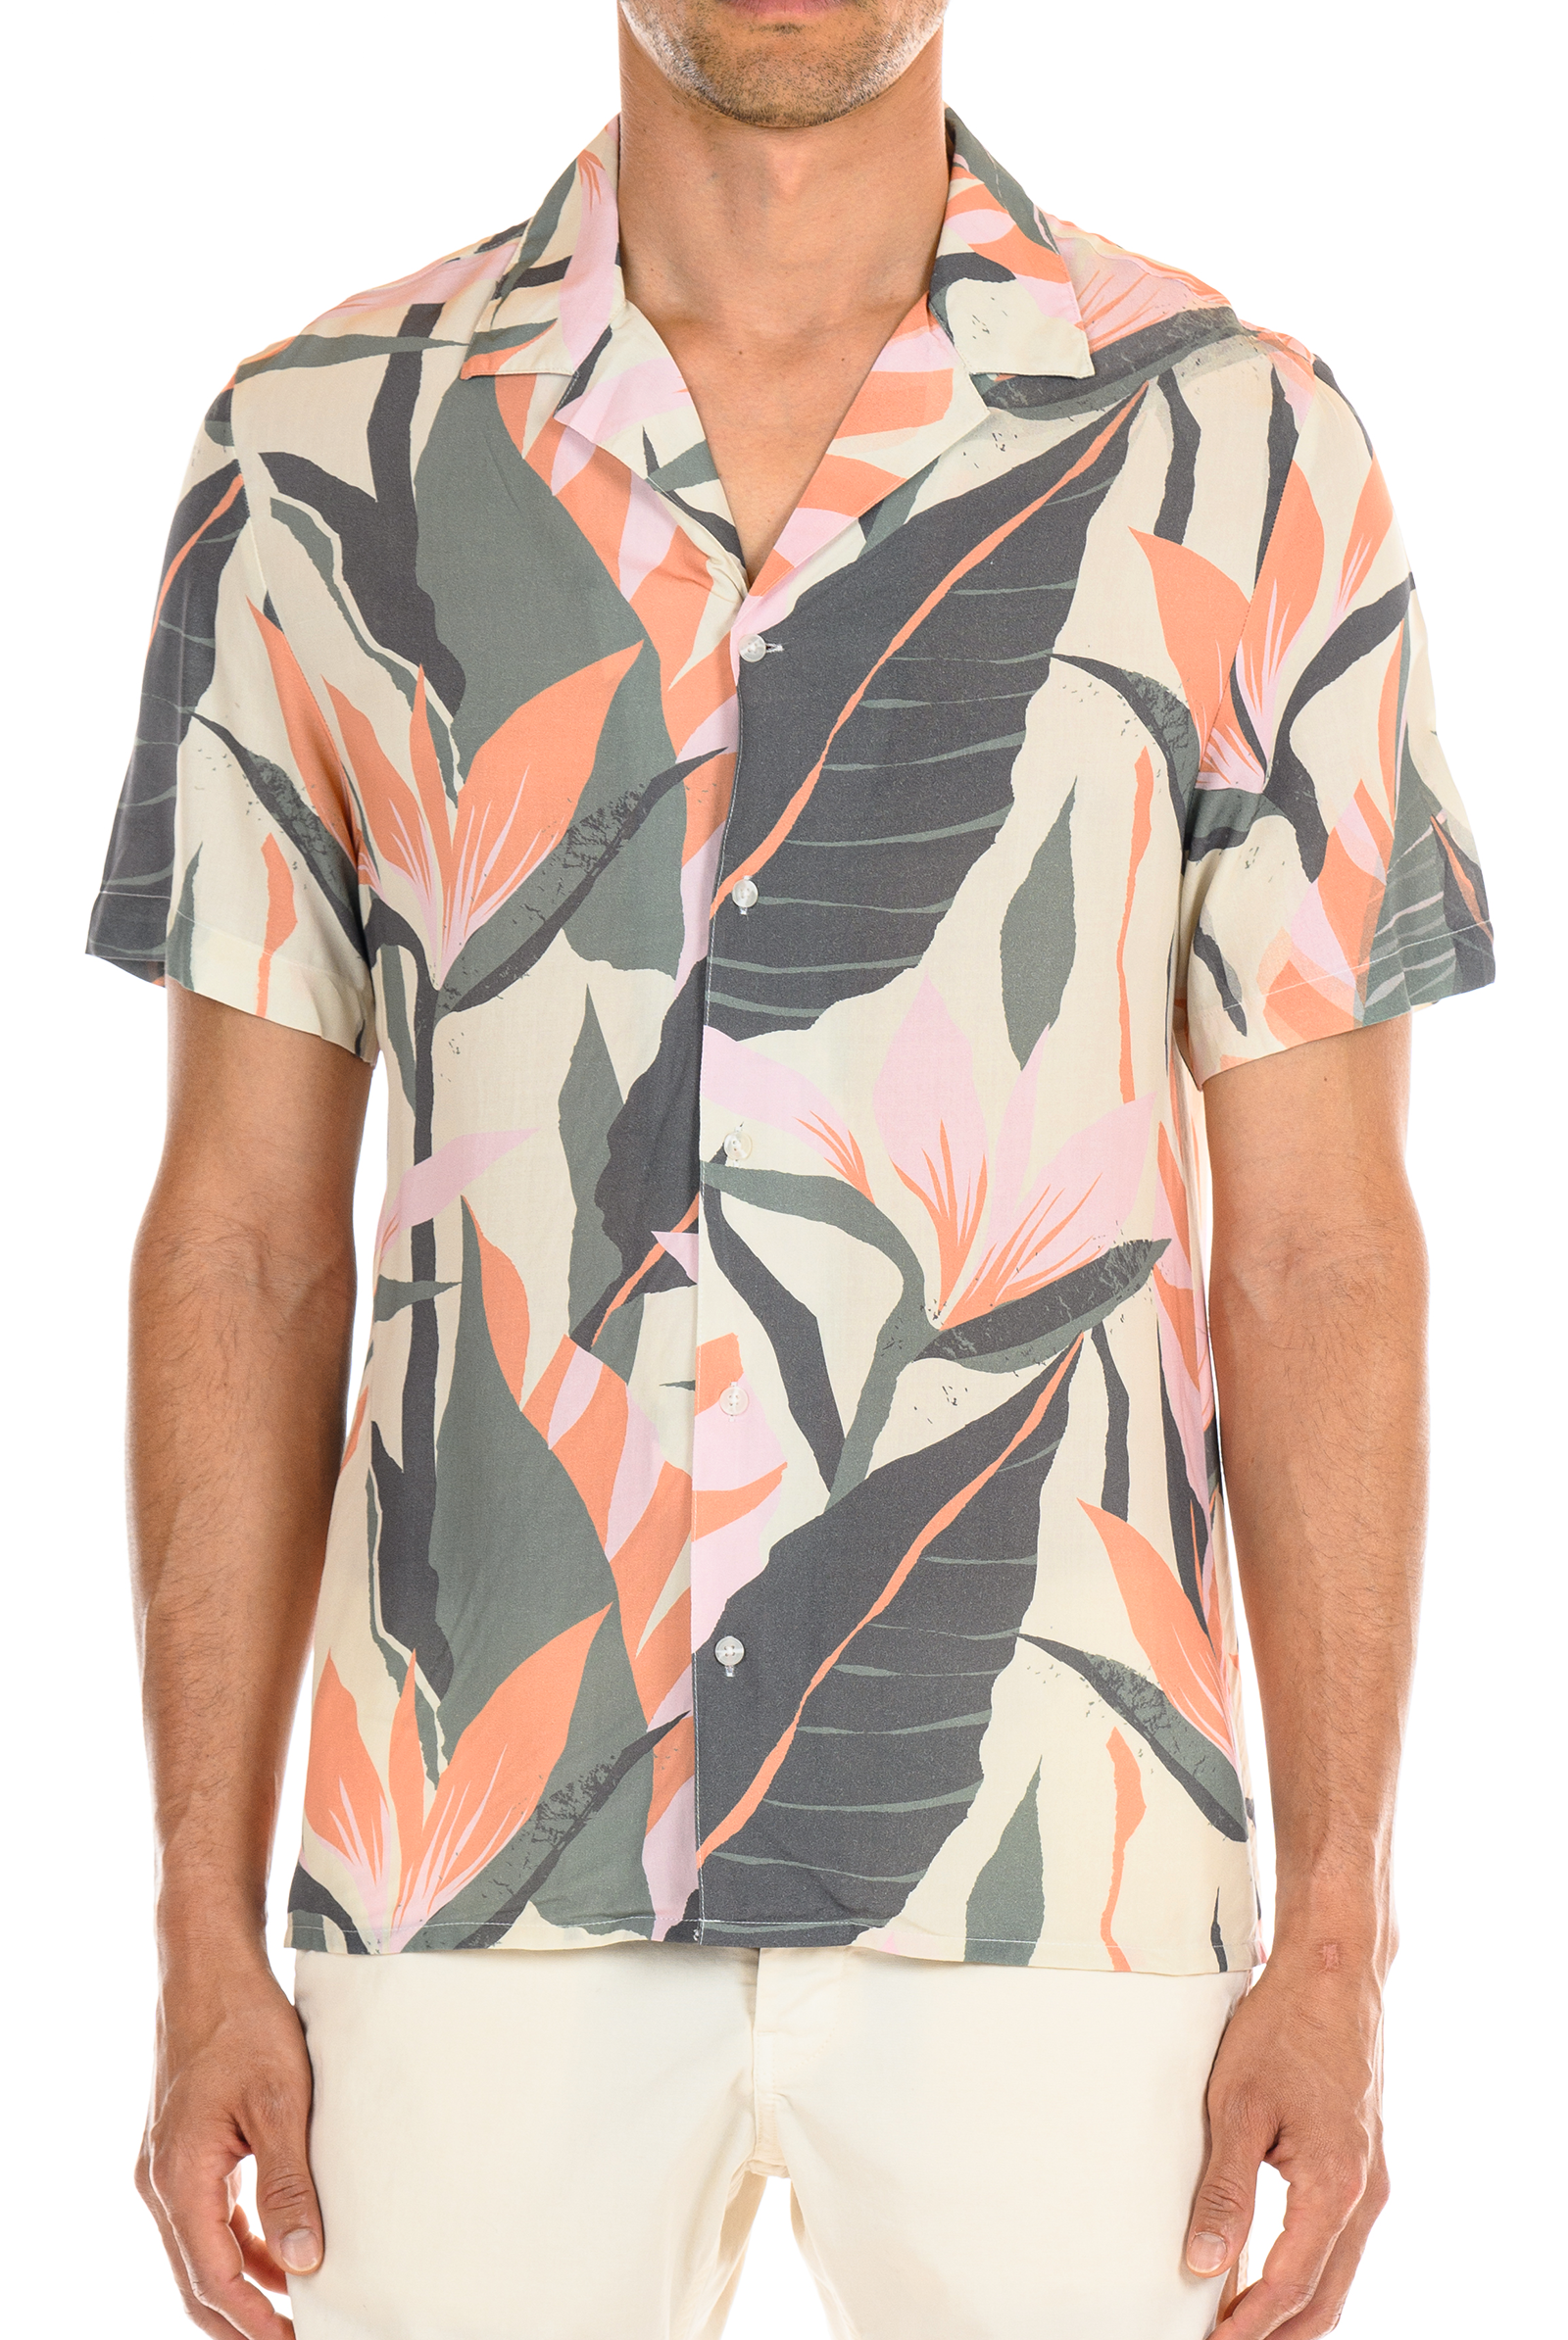 Rio Paradise Shirt-Men's Tops-Vixen Collection, Day Spa and Women's Boutique Located in Seattle, Washington